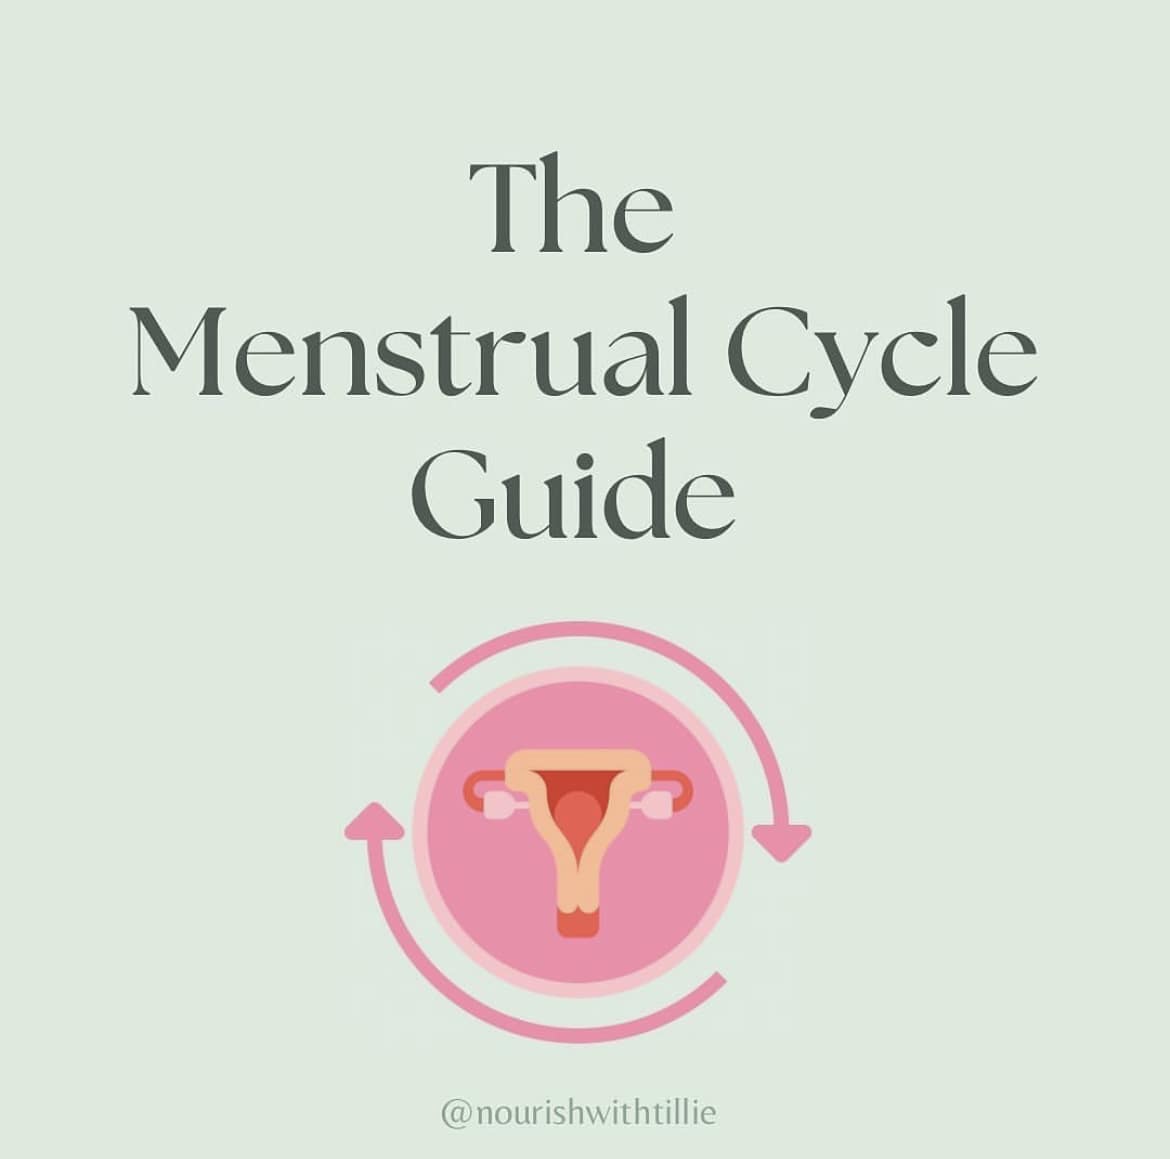 Inforgraphic by Nourish with Tillie about the Menstrual Cycle